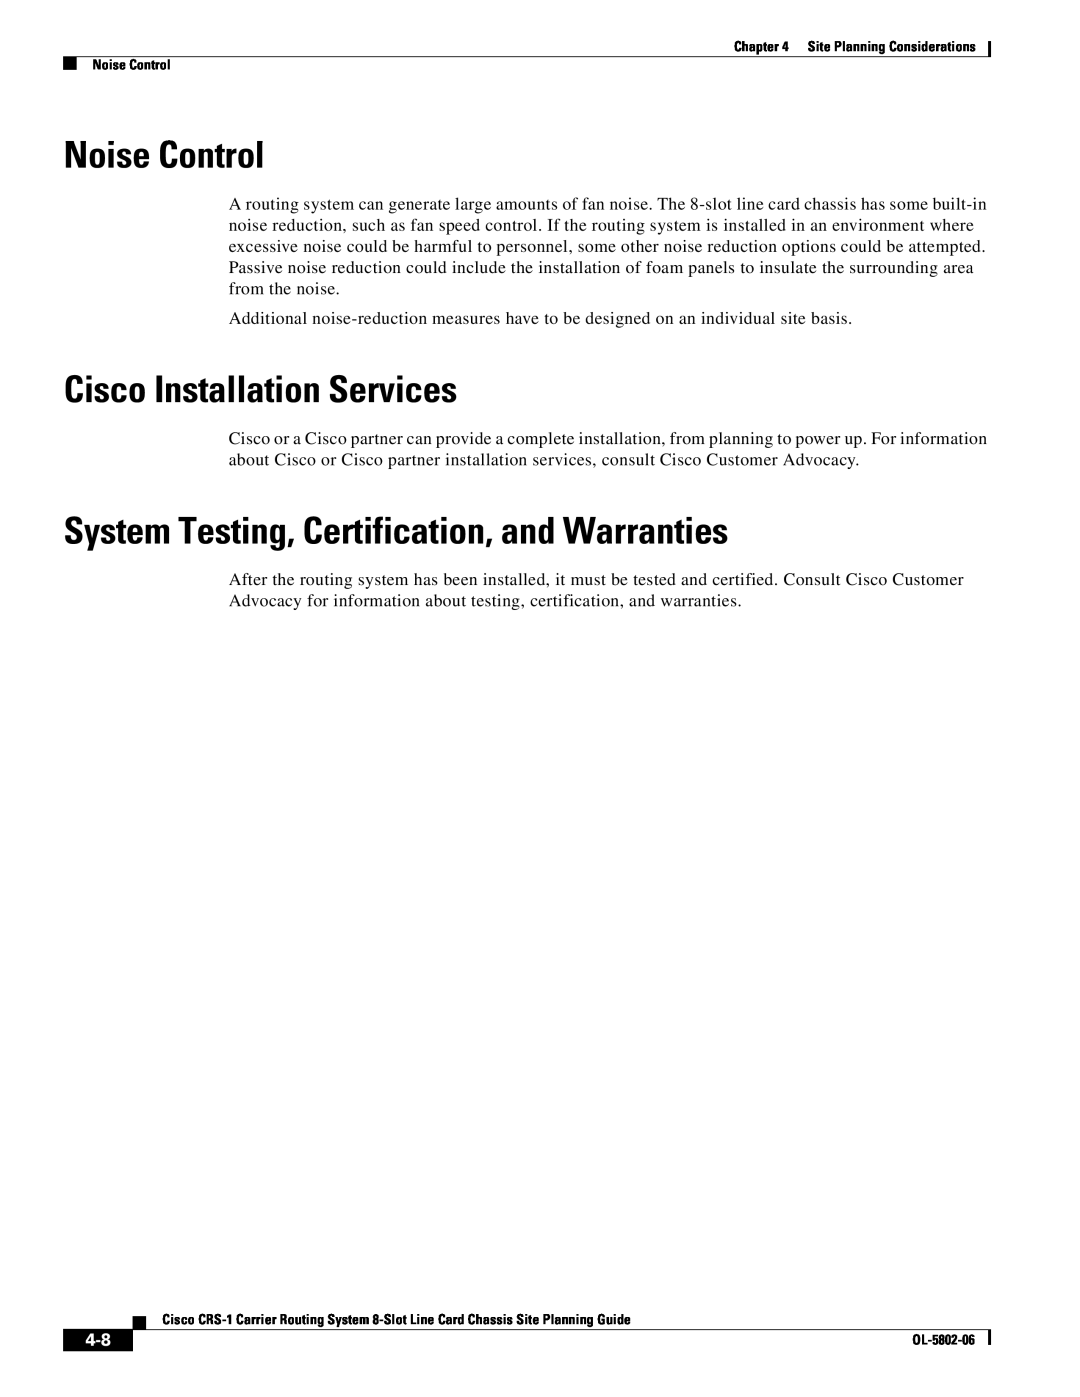 Cisco Systems CRS-1 manual Noise Control, Cisco Installation Services, System Testing, Certification, and Warranties 